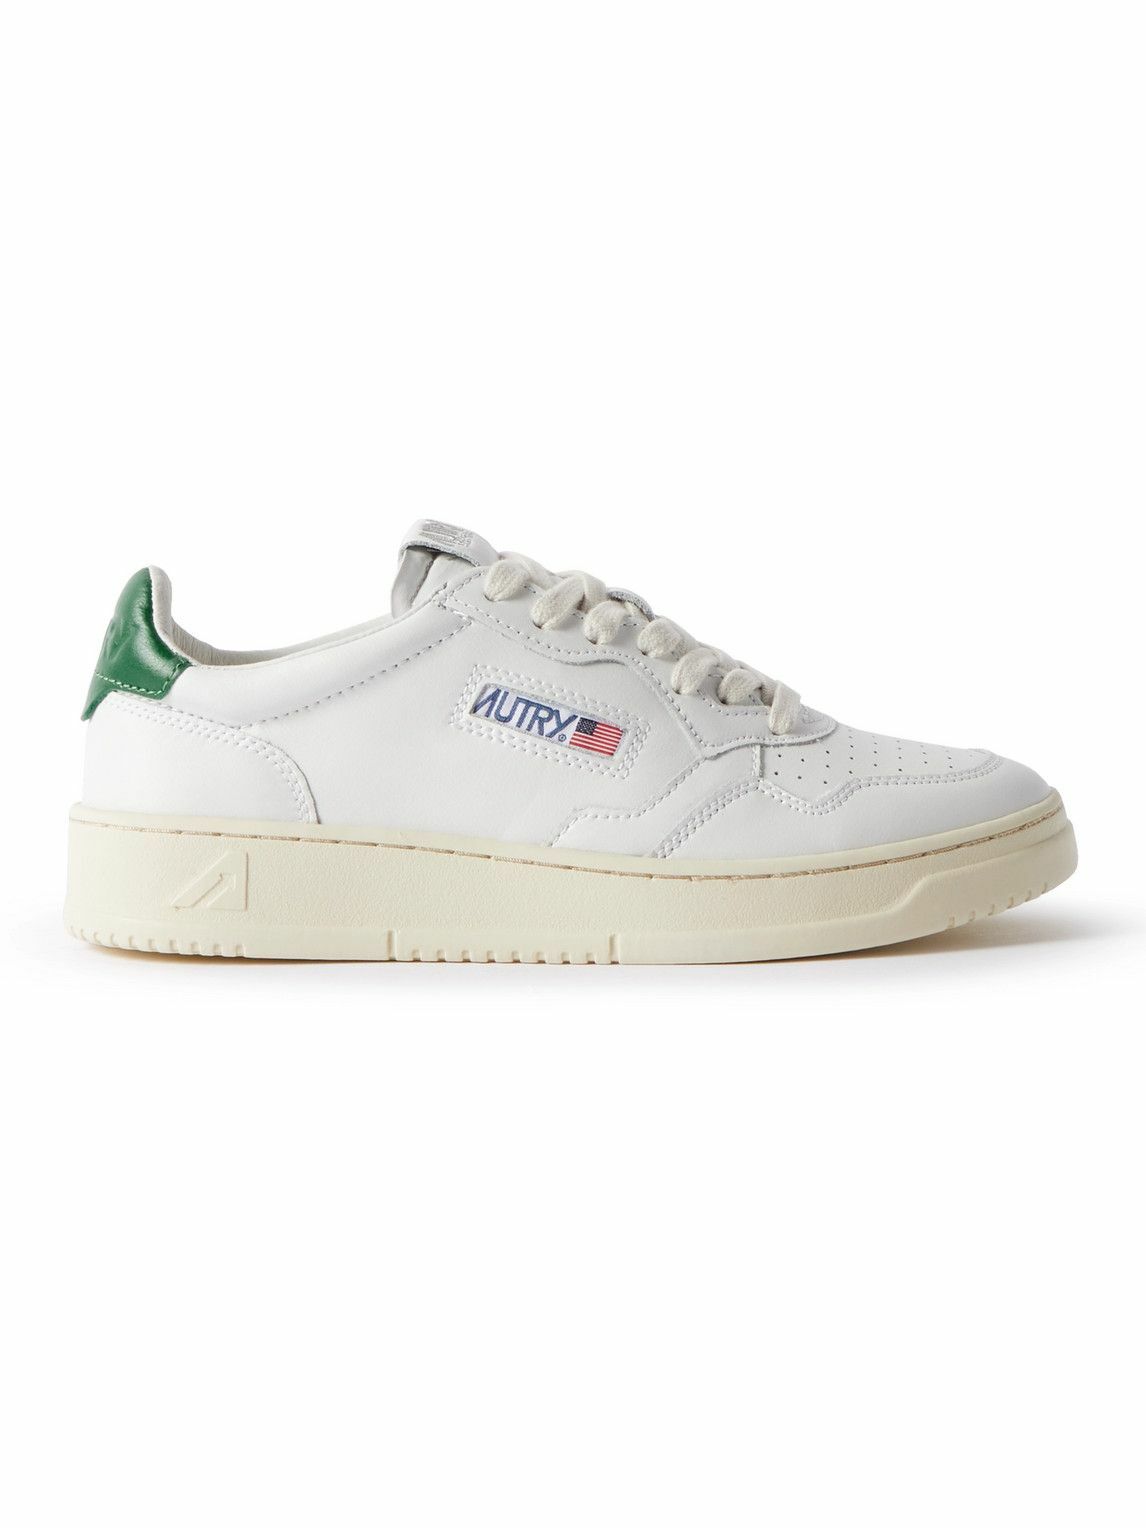 Autry - Medalist Two-Tone Leather Sneakers - White Autry